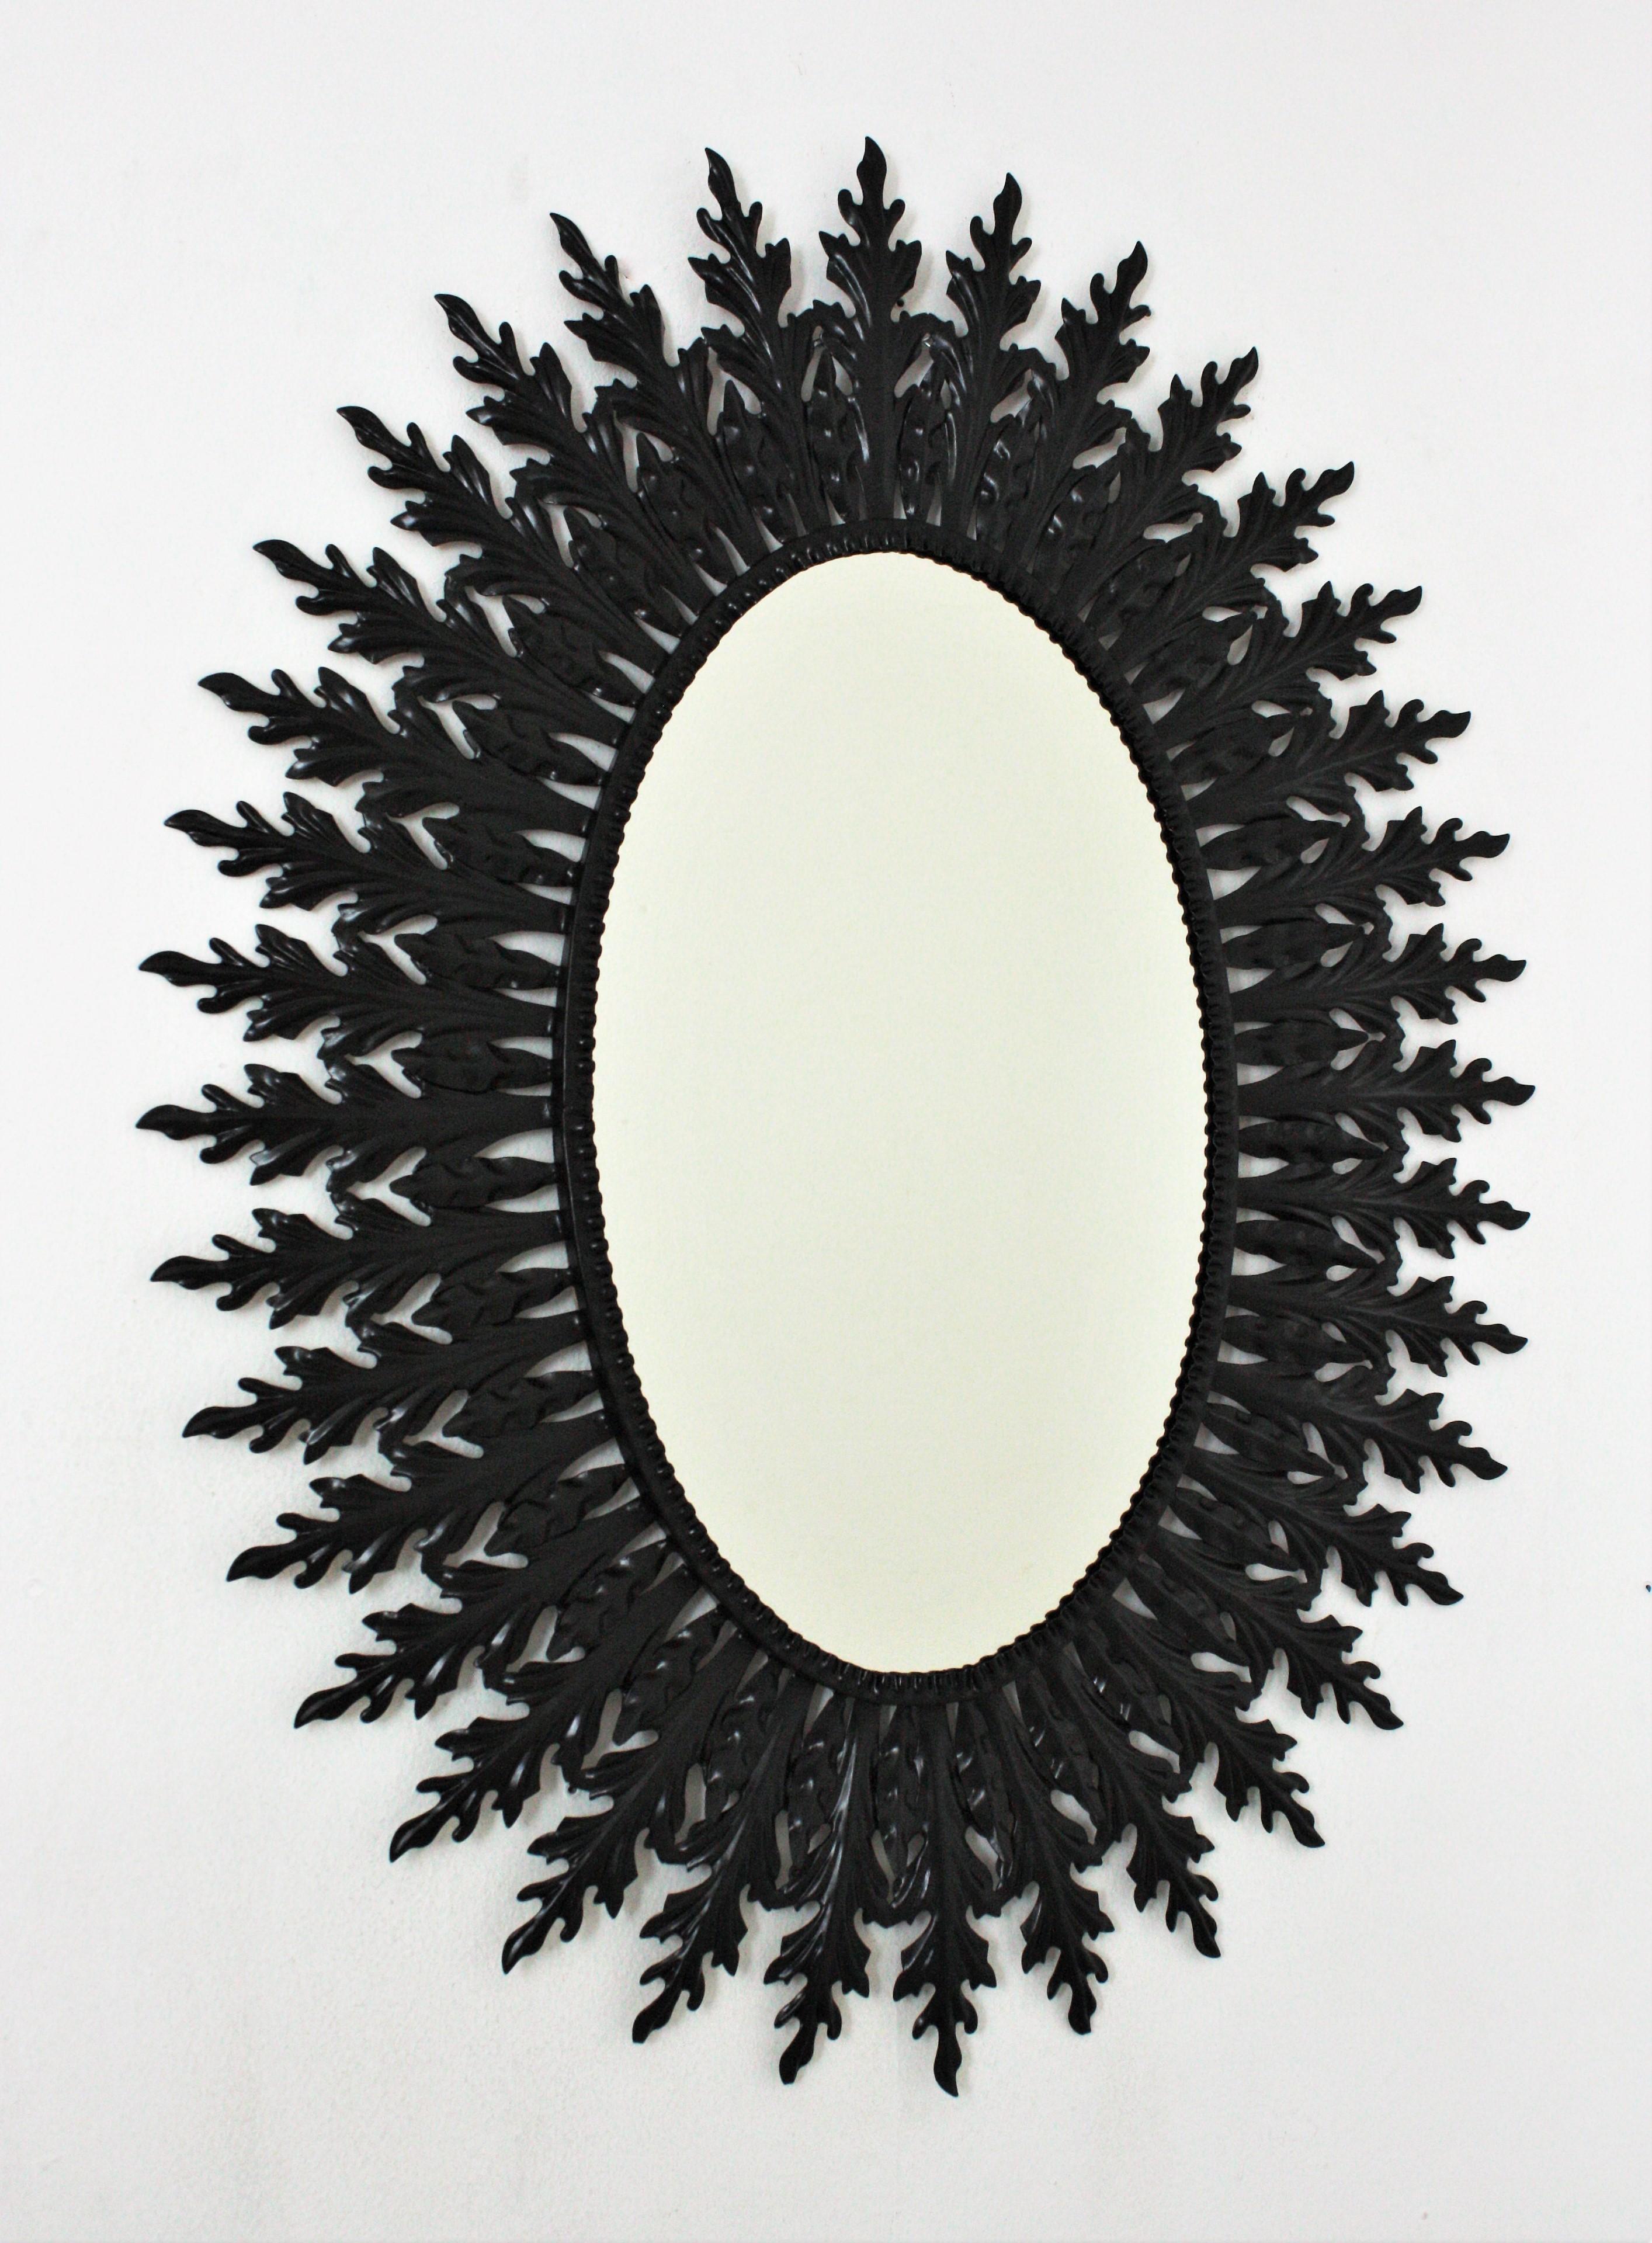 A huge oval sunburst mirror handcrafted in metal with black painted finishing, Spain, 1960s.
The frame of this oval mirror has a layer or large leaves and a layer of small leaves surrounding the glass.
This iron sunburst mirror has been finished